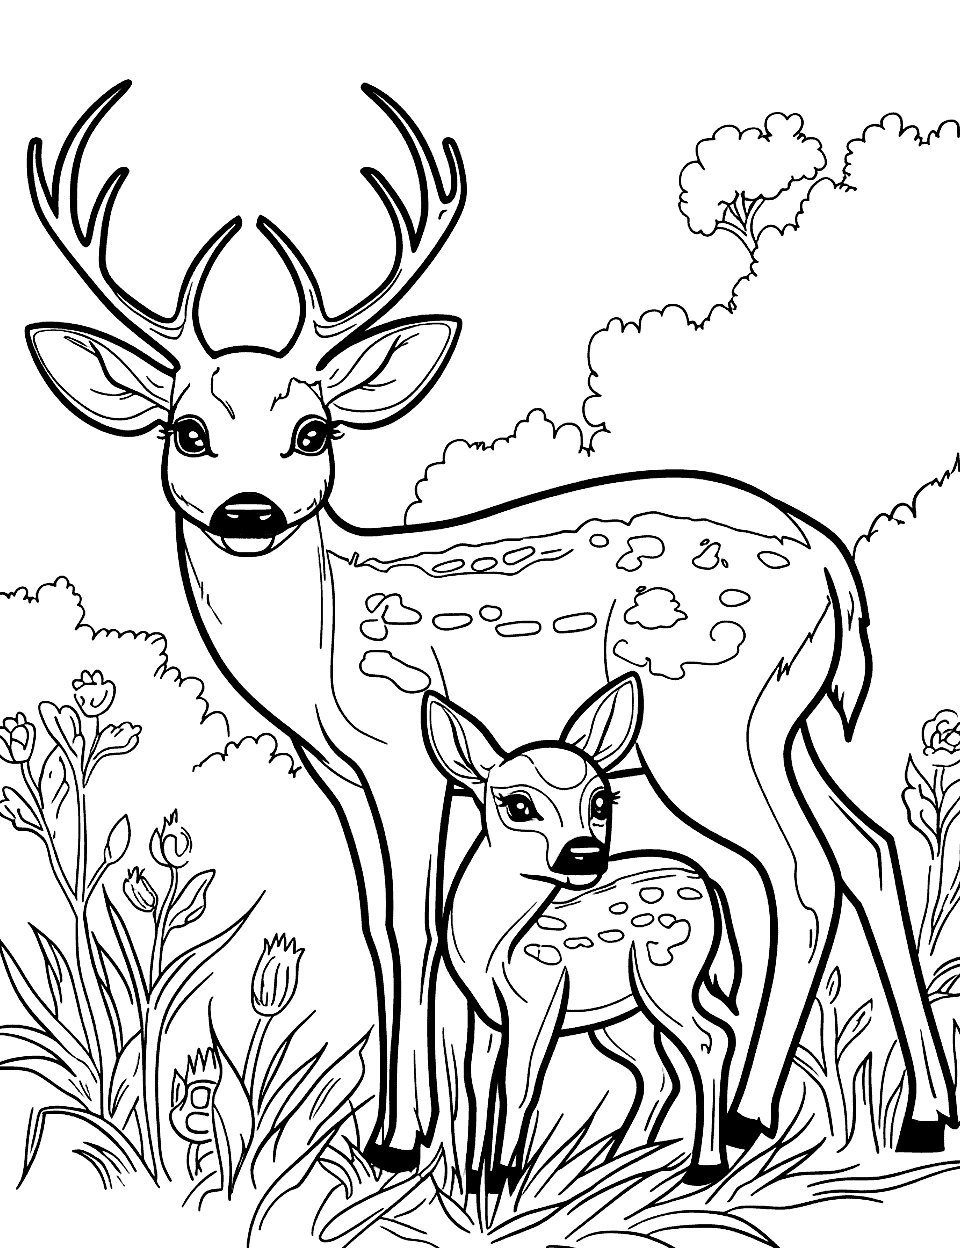 Mother Deer and Fawn in Spring Coloring Page - A mother deer and her fawn enjoying the fresh spring grass.